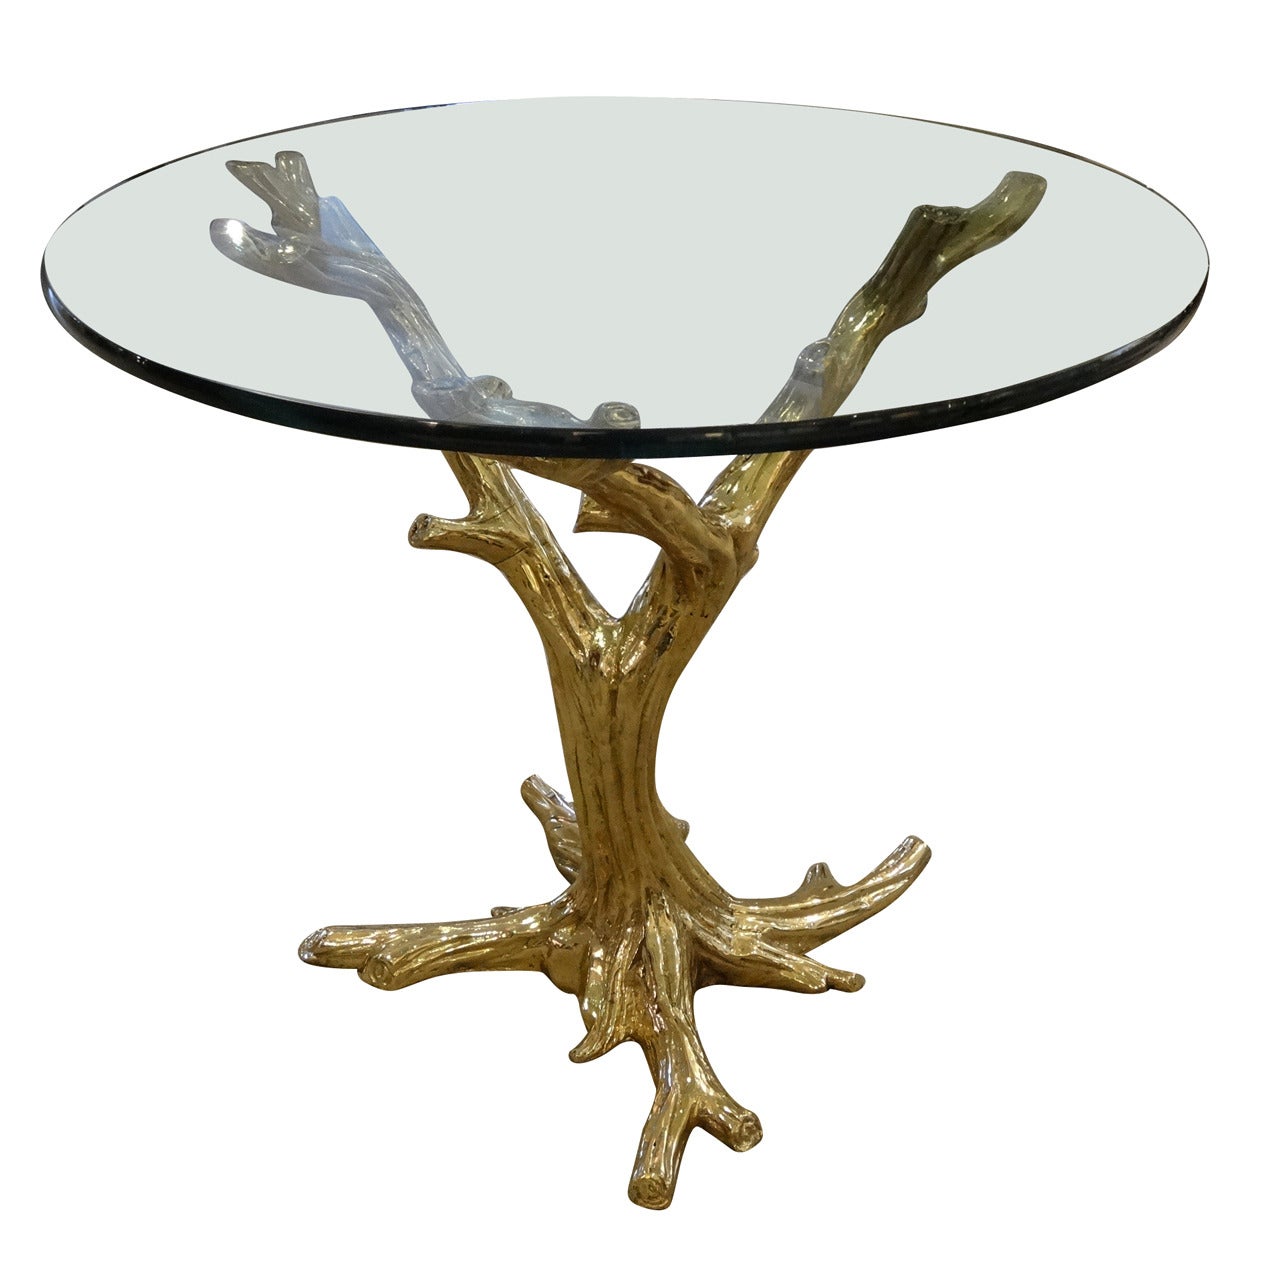 Brass Center Table in form of "Tree"